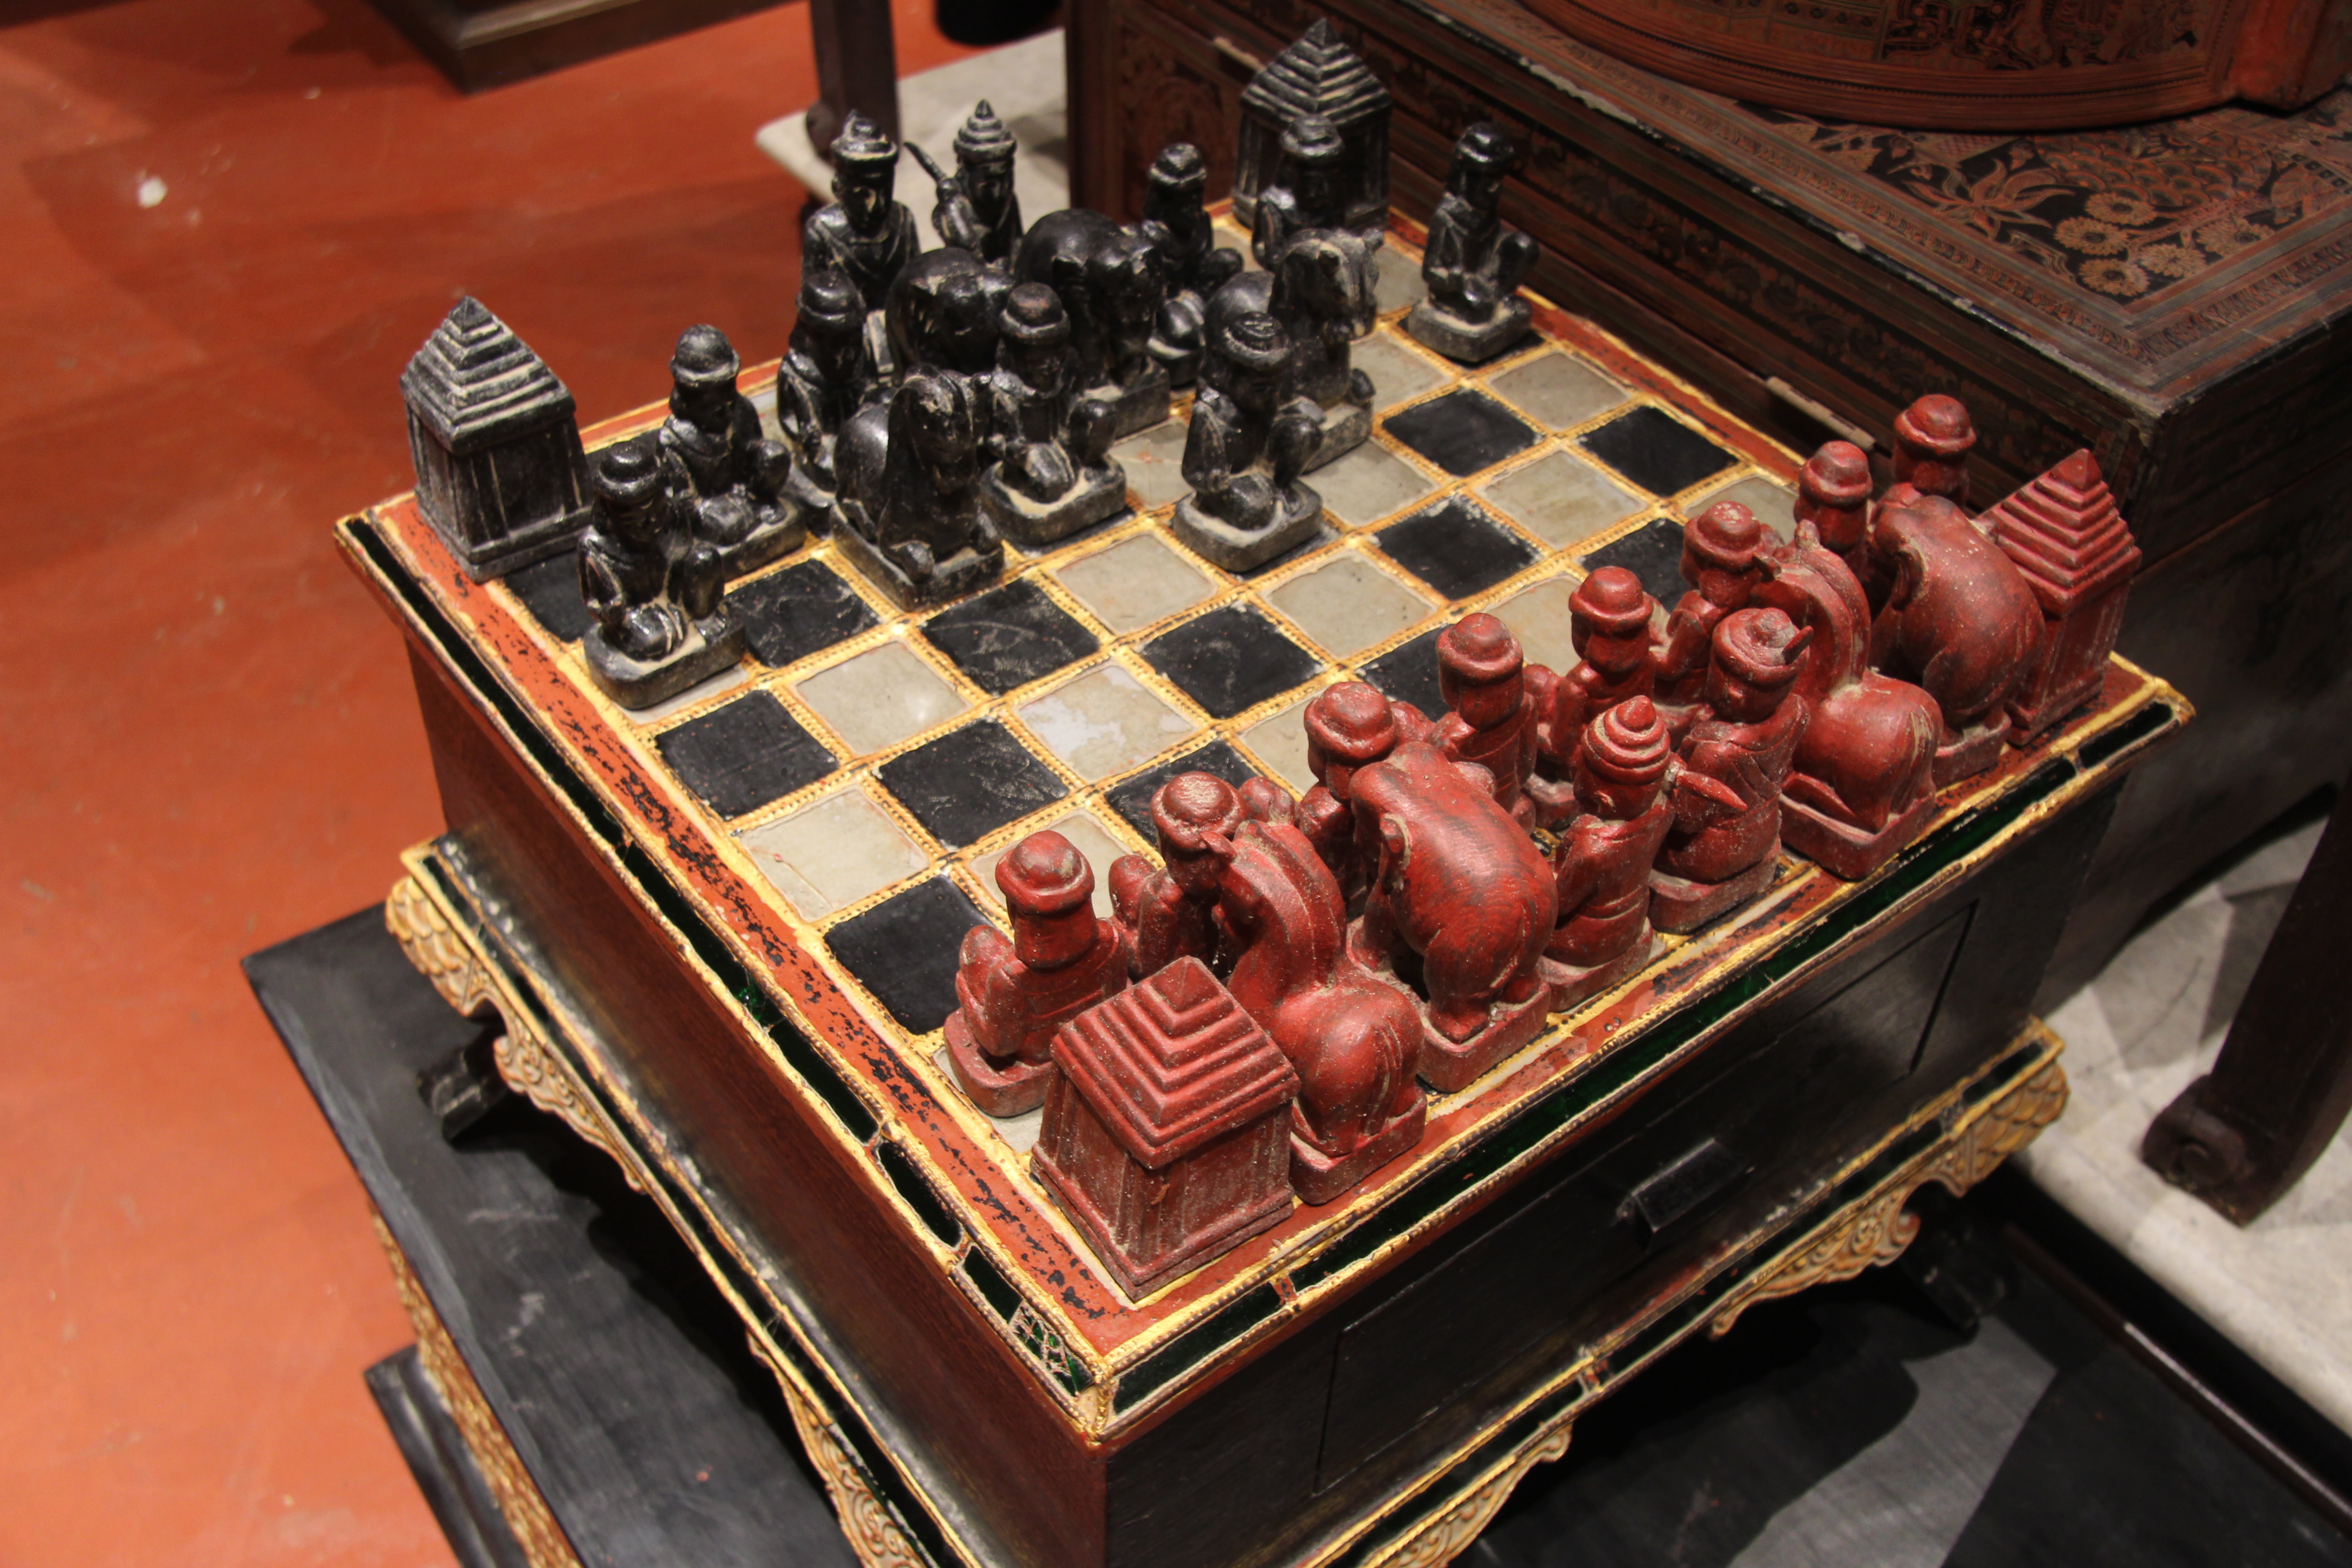 A chess set from the 1930s, similar to the one bought by Ai Weiwei.